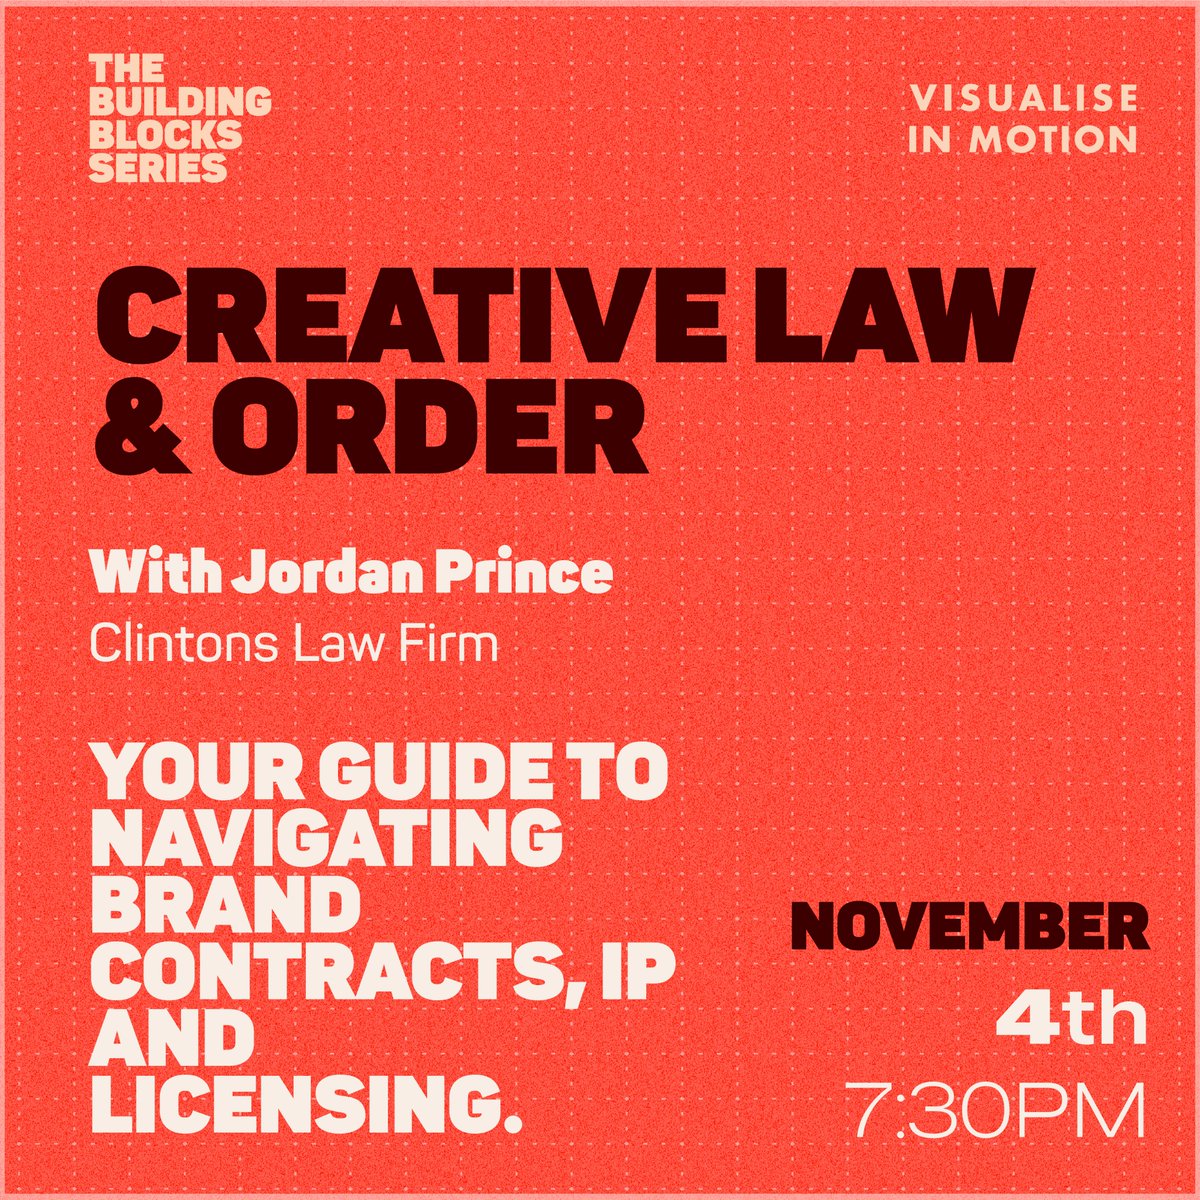 Next up is Creative Law & Order on November 4th @ 7:30pm & this one will be especially useful to those who are in the business of creating content. This session will give you an overview of IP, licensing & brand contracts. Register for tickets here:  https://www.eventbrite.co.uk/e/122283295629 